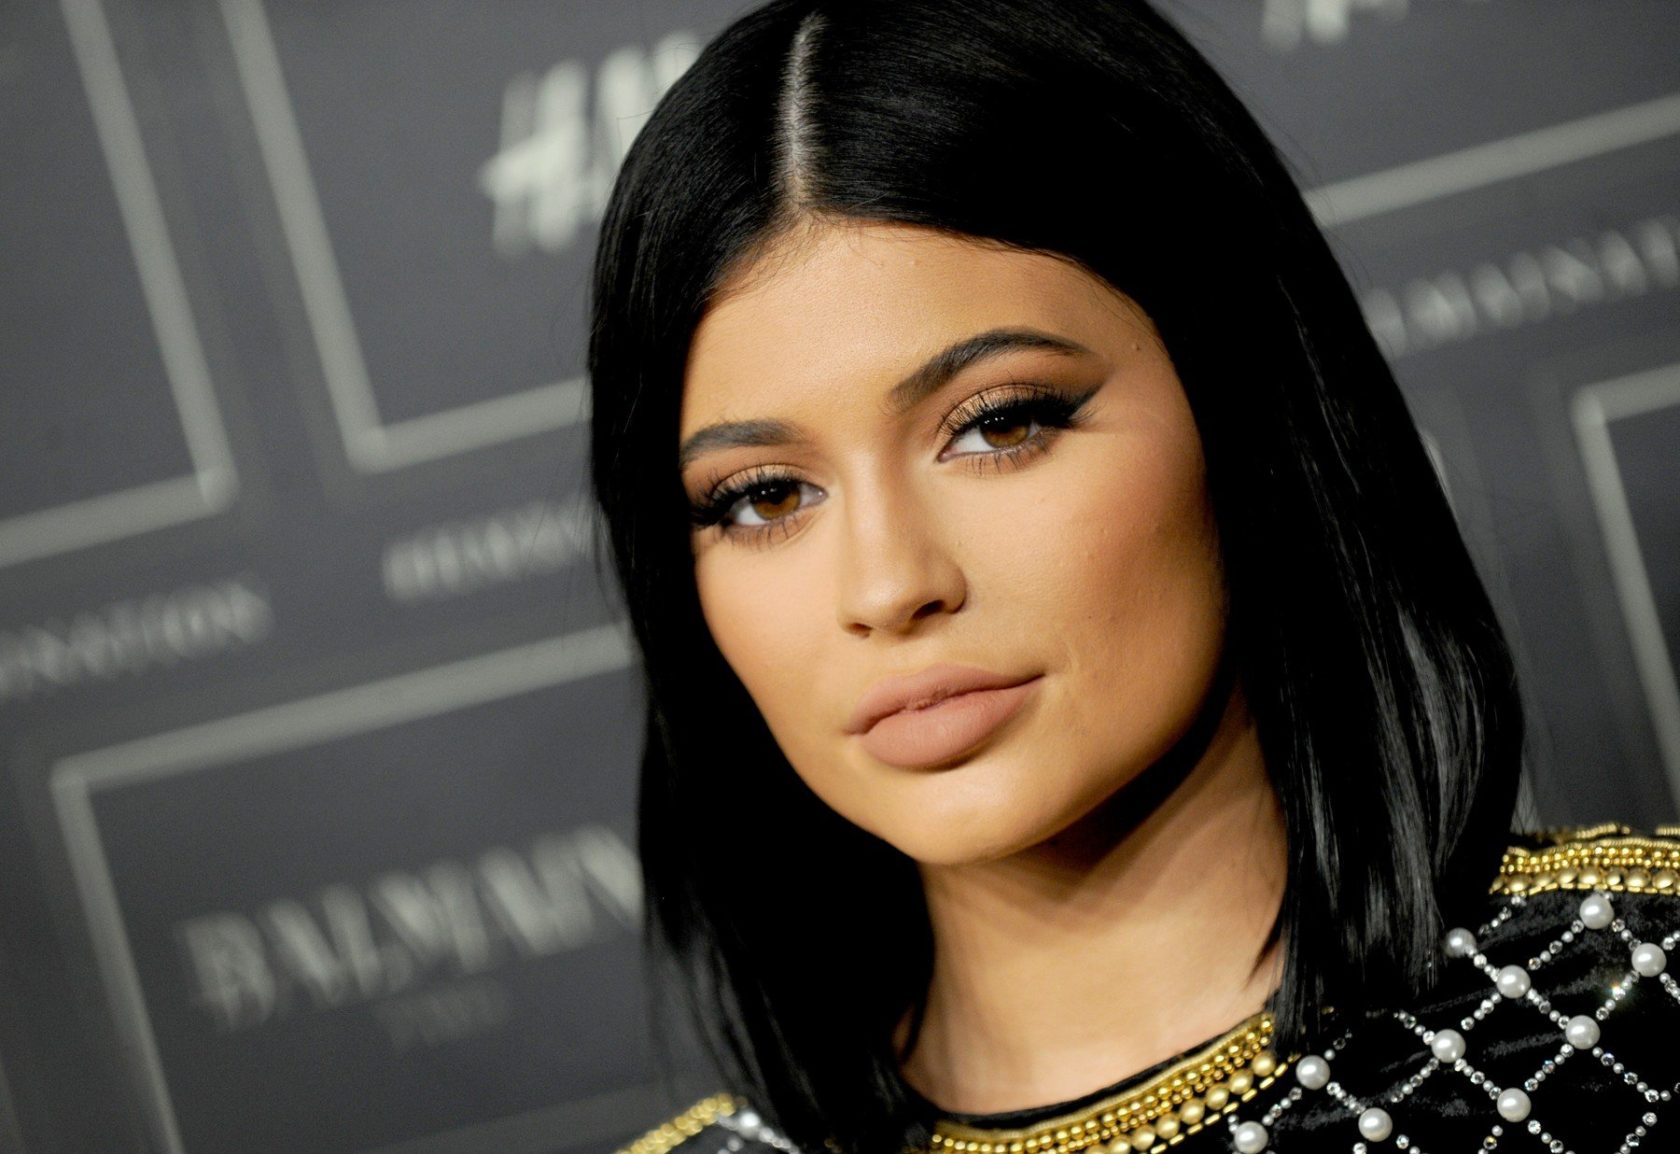 Kylie Jenner attend the BALMAIN X H&M Collection Launch at 23 Wall Street on October 20, 2015 in New York City., Image: 263424772, License: Rights-managed, Restrictions: WORLD RIGHTS - Fee Payable Upon Reproduction - For queries contact Photoshot - sales@photoshot.com London: +44 (0) 20 7421 6000 Florida: +1 239 689 1883 Berlin: +49 (0) 30 76 212 251, Model Release: no, Credit line: Profimedia, Uppa entertainment